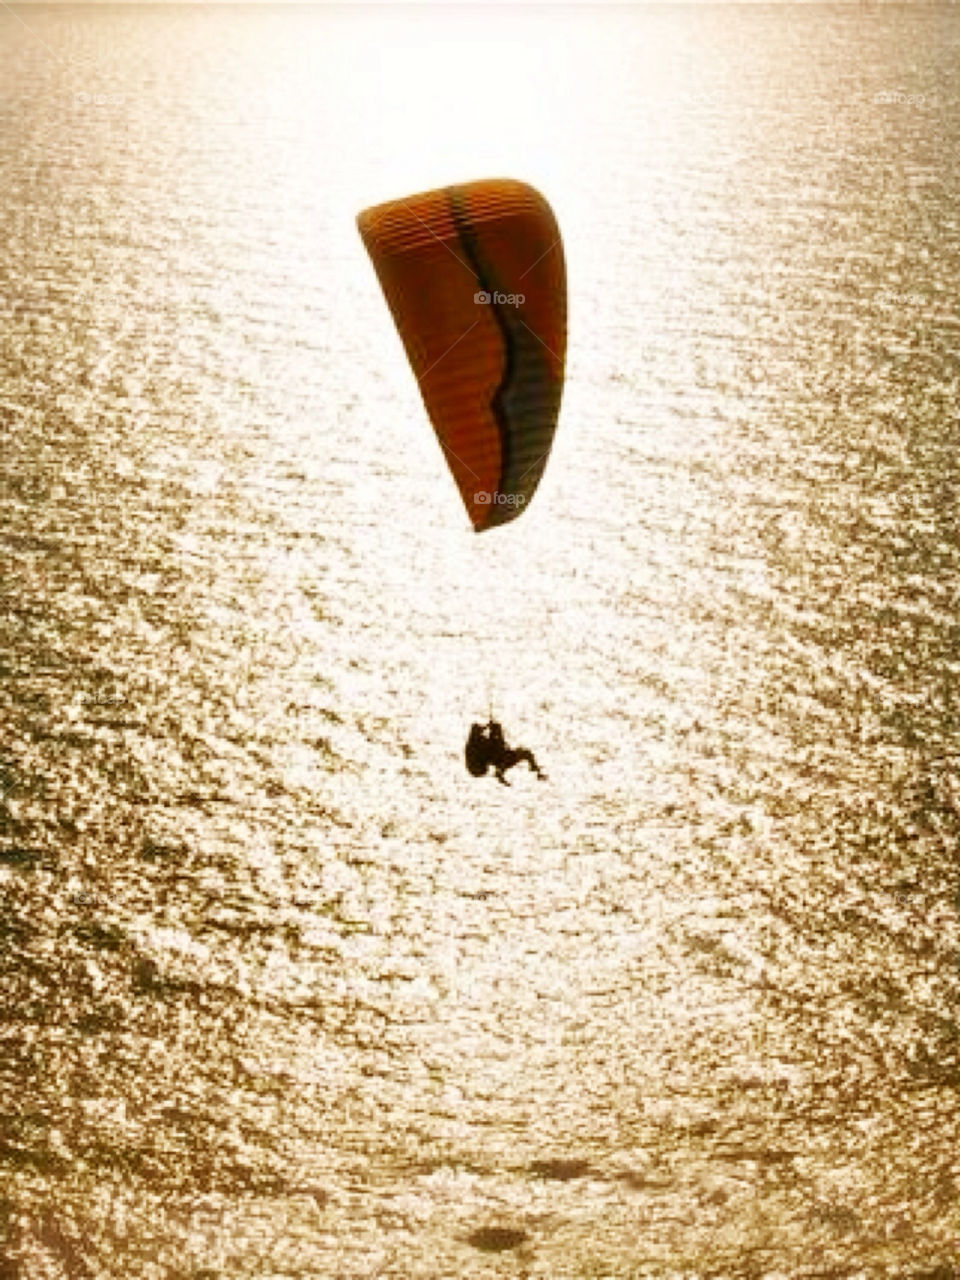 Paragliding above the sea